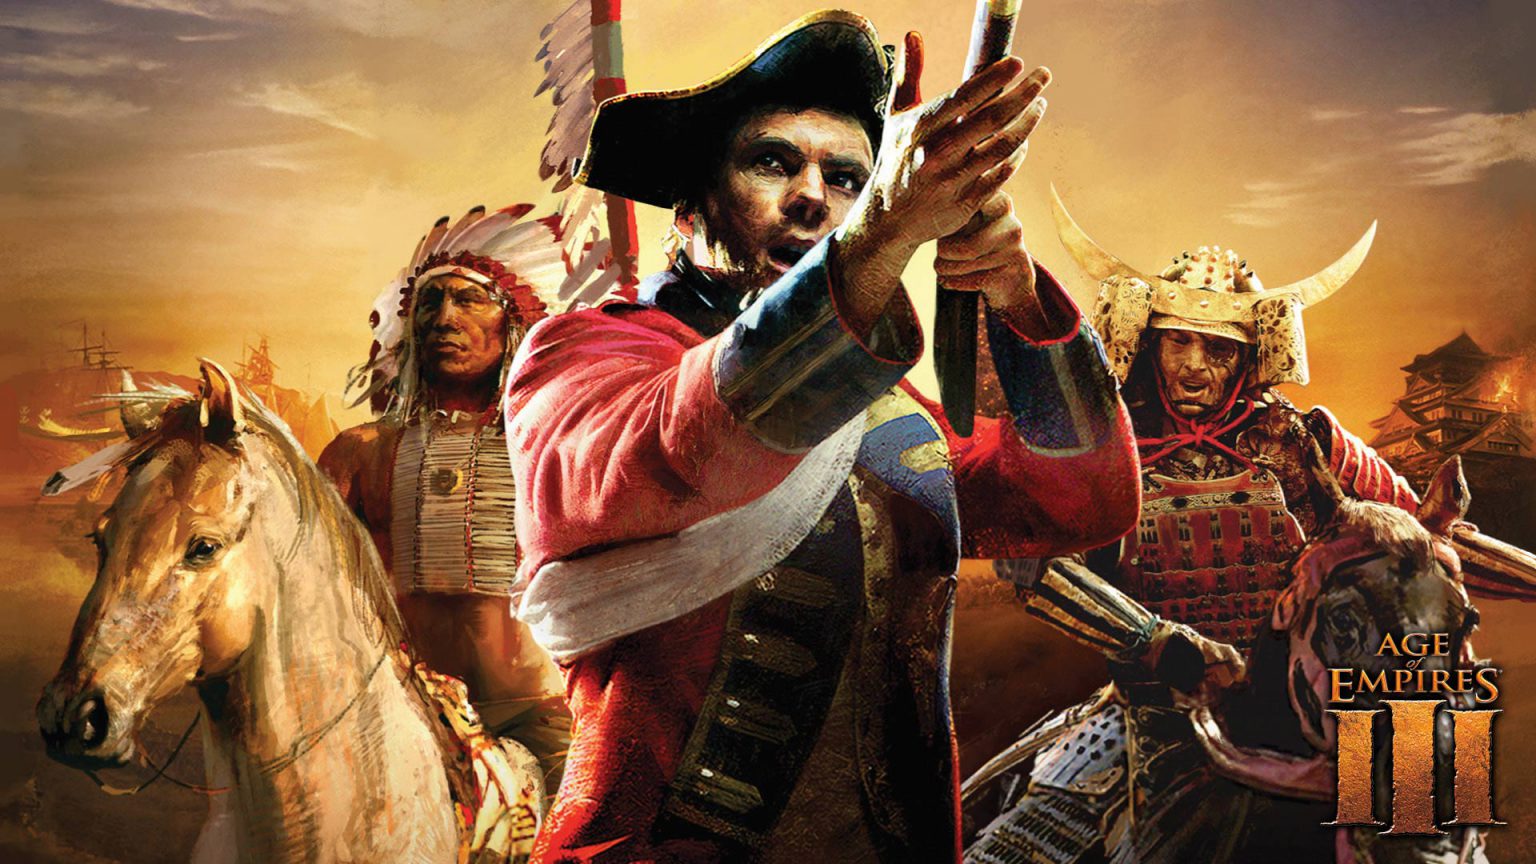 Age of Empires 3 - Definitive Edition